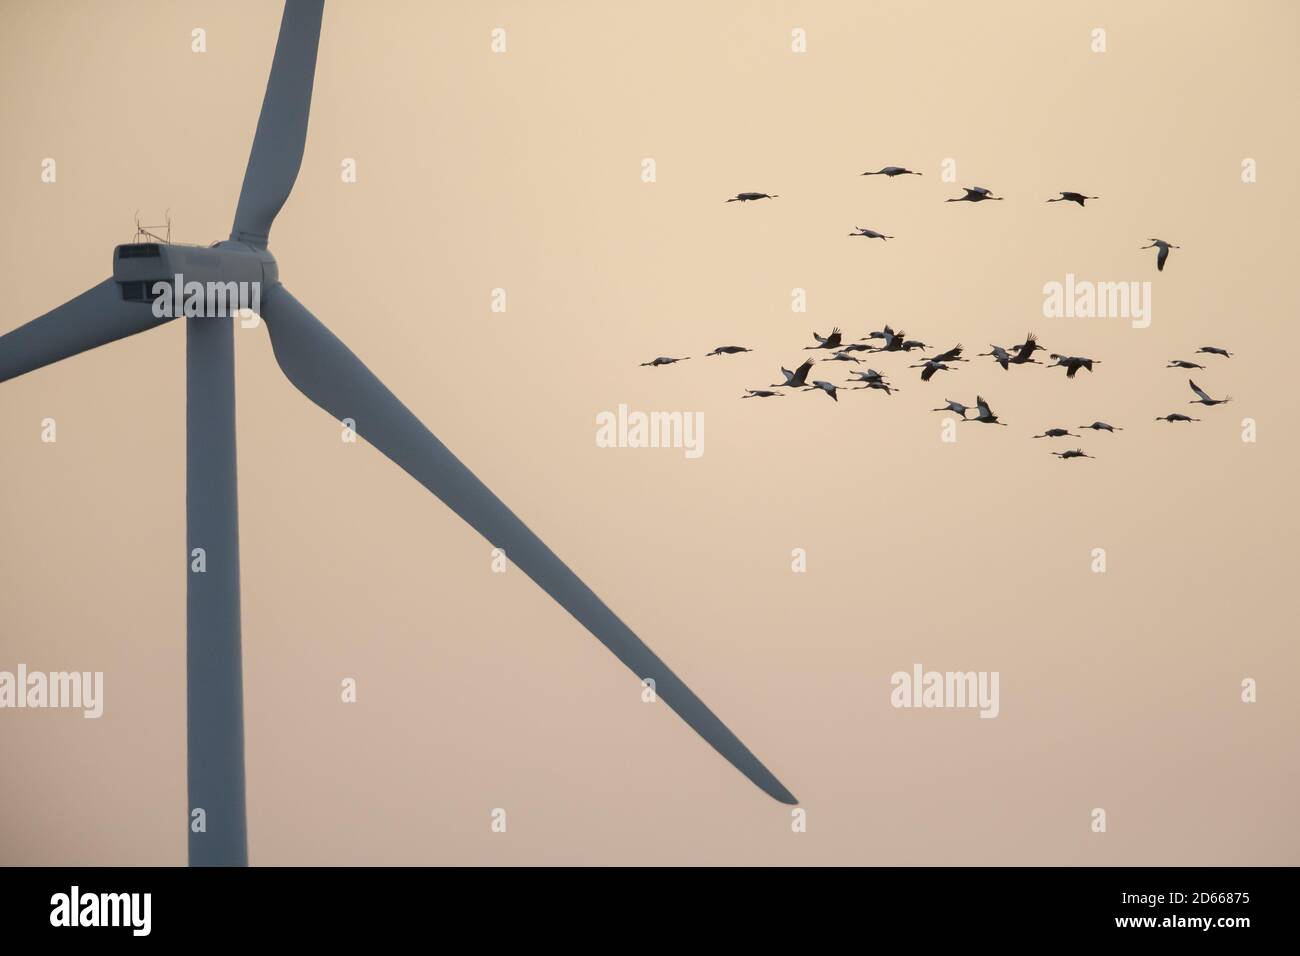 Flock of Cranes fly in sunrise colored sky near the wind turbine Stock Photo